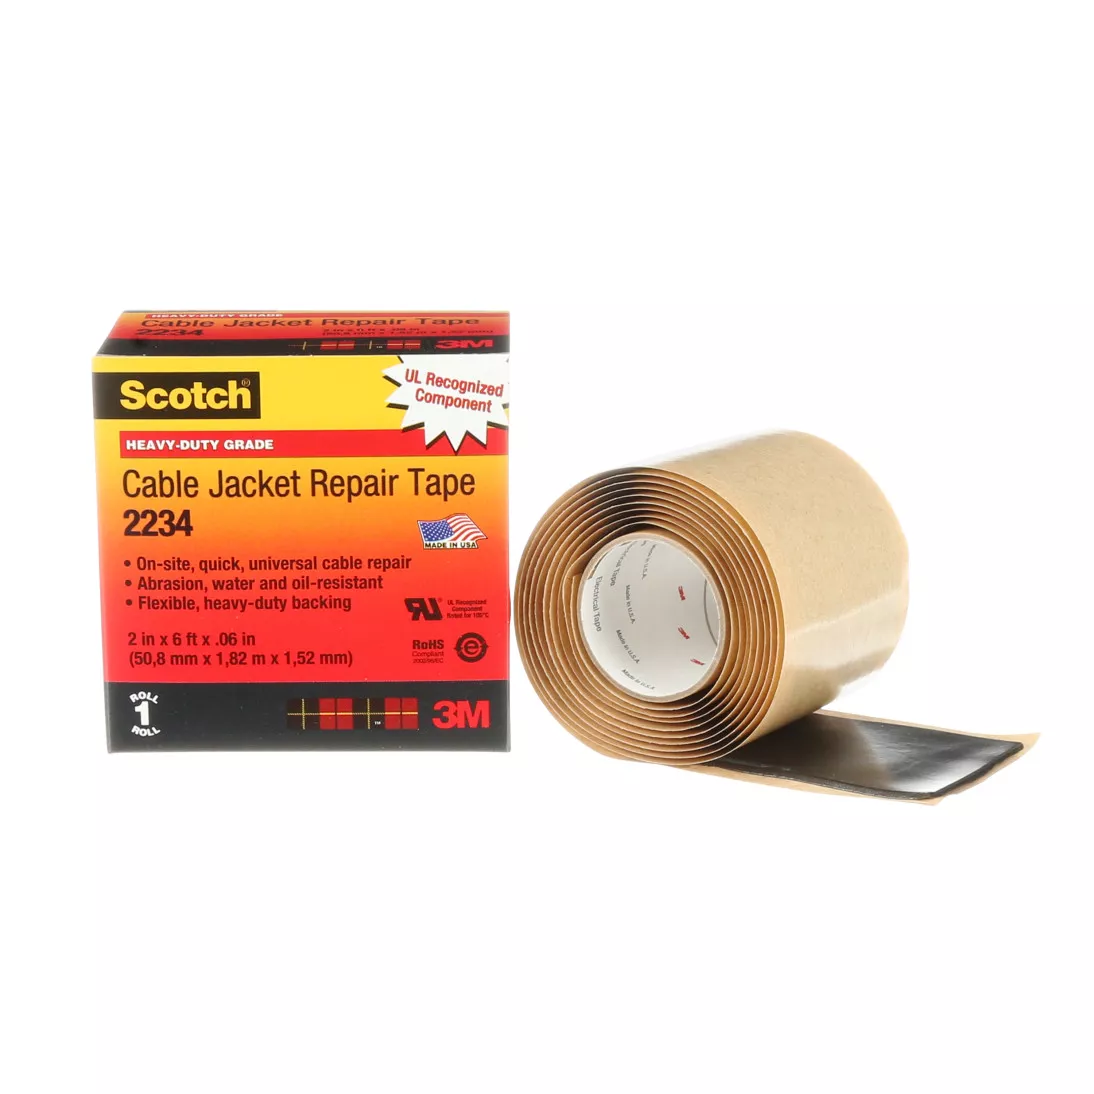 Scotch® Cable Jacket Repair Tape 2234, 2 in x 6 ft, Black, 1
roll/carton, 10 rolls/Case